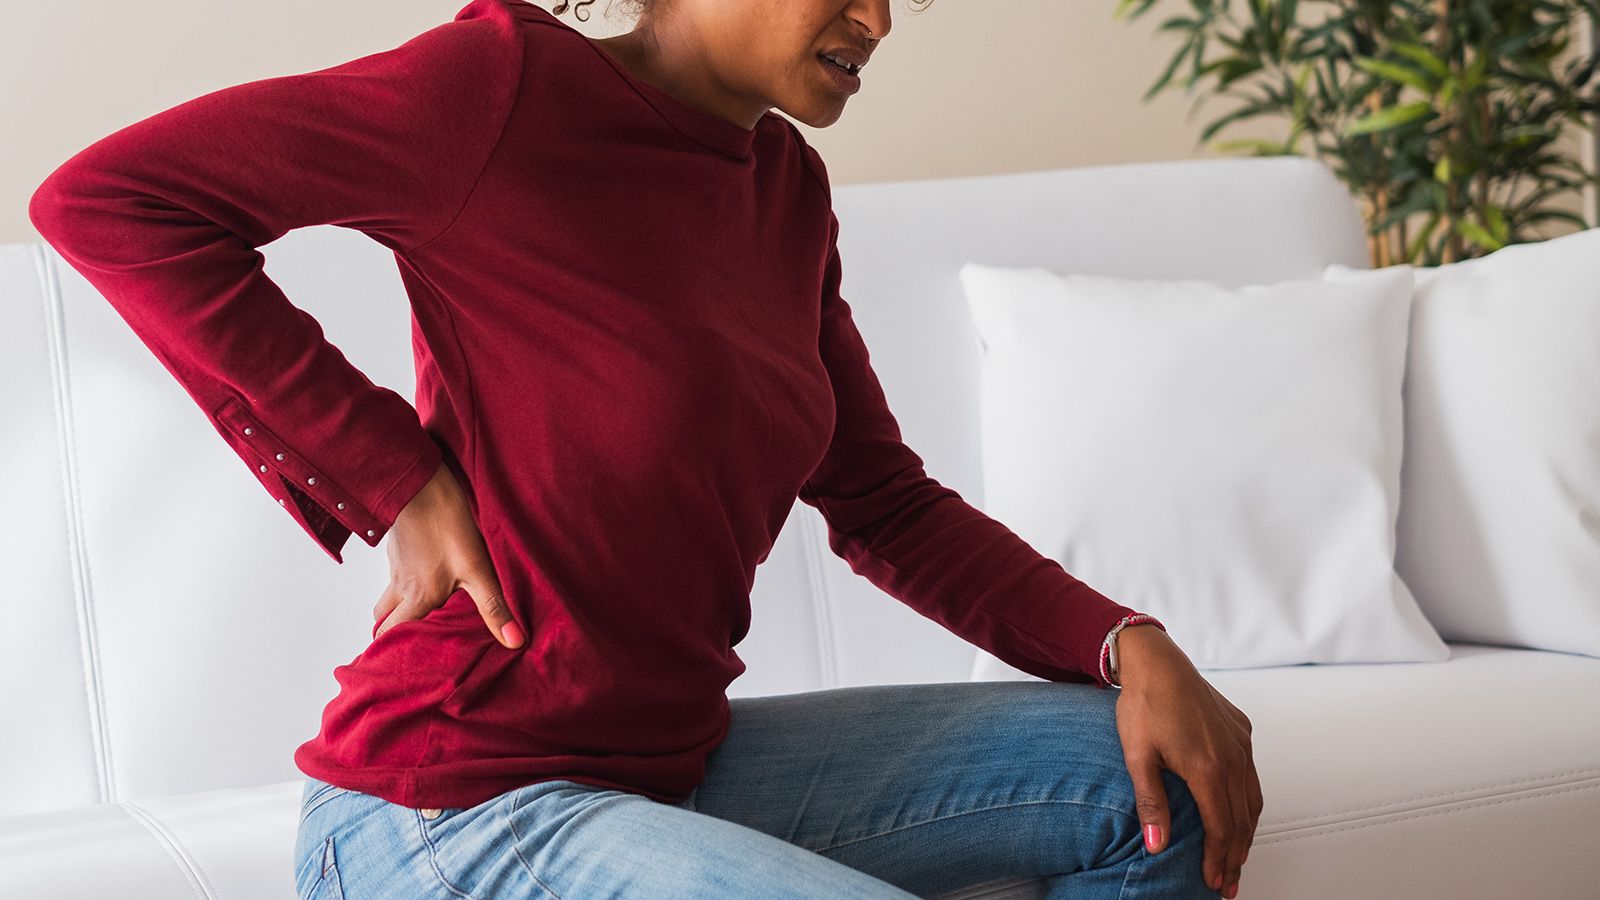 Helpful Hints for a quick recovery from Acute Low Back Pain